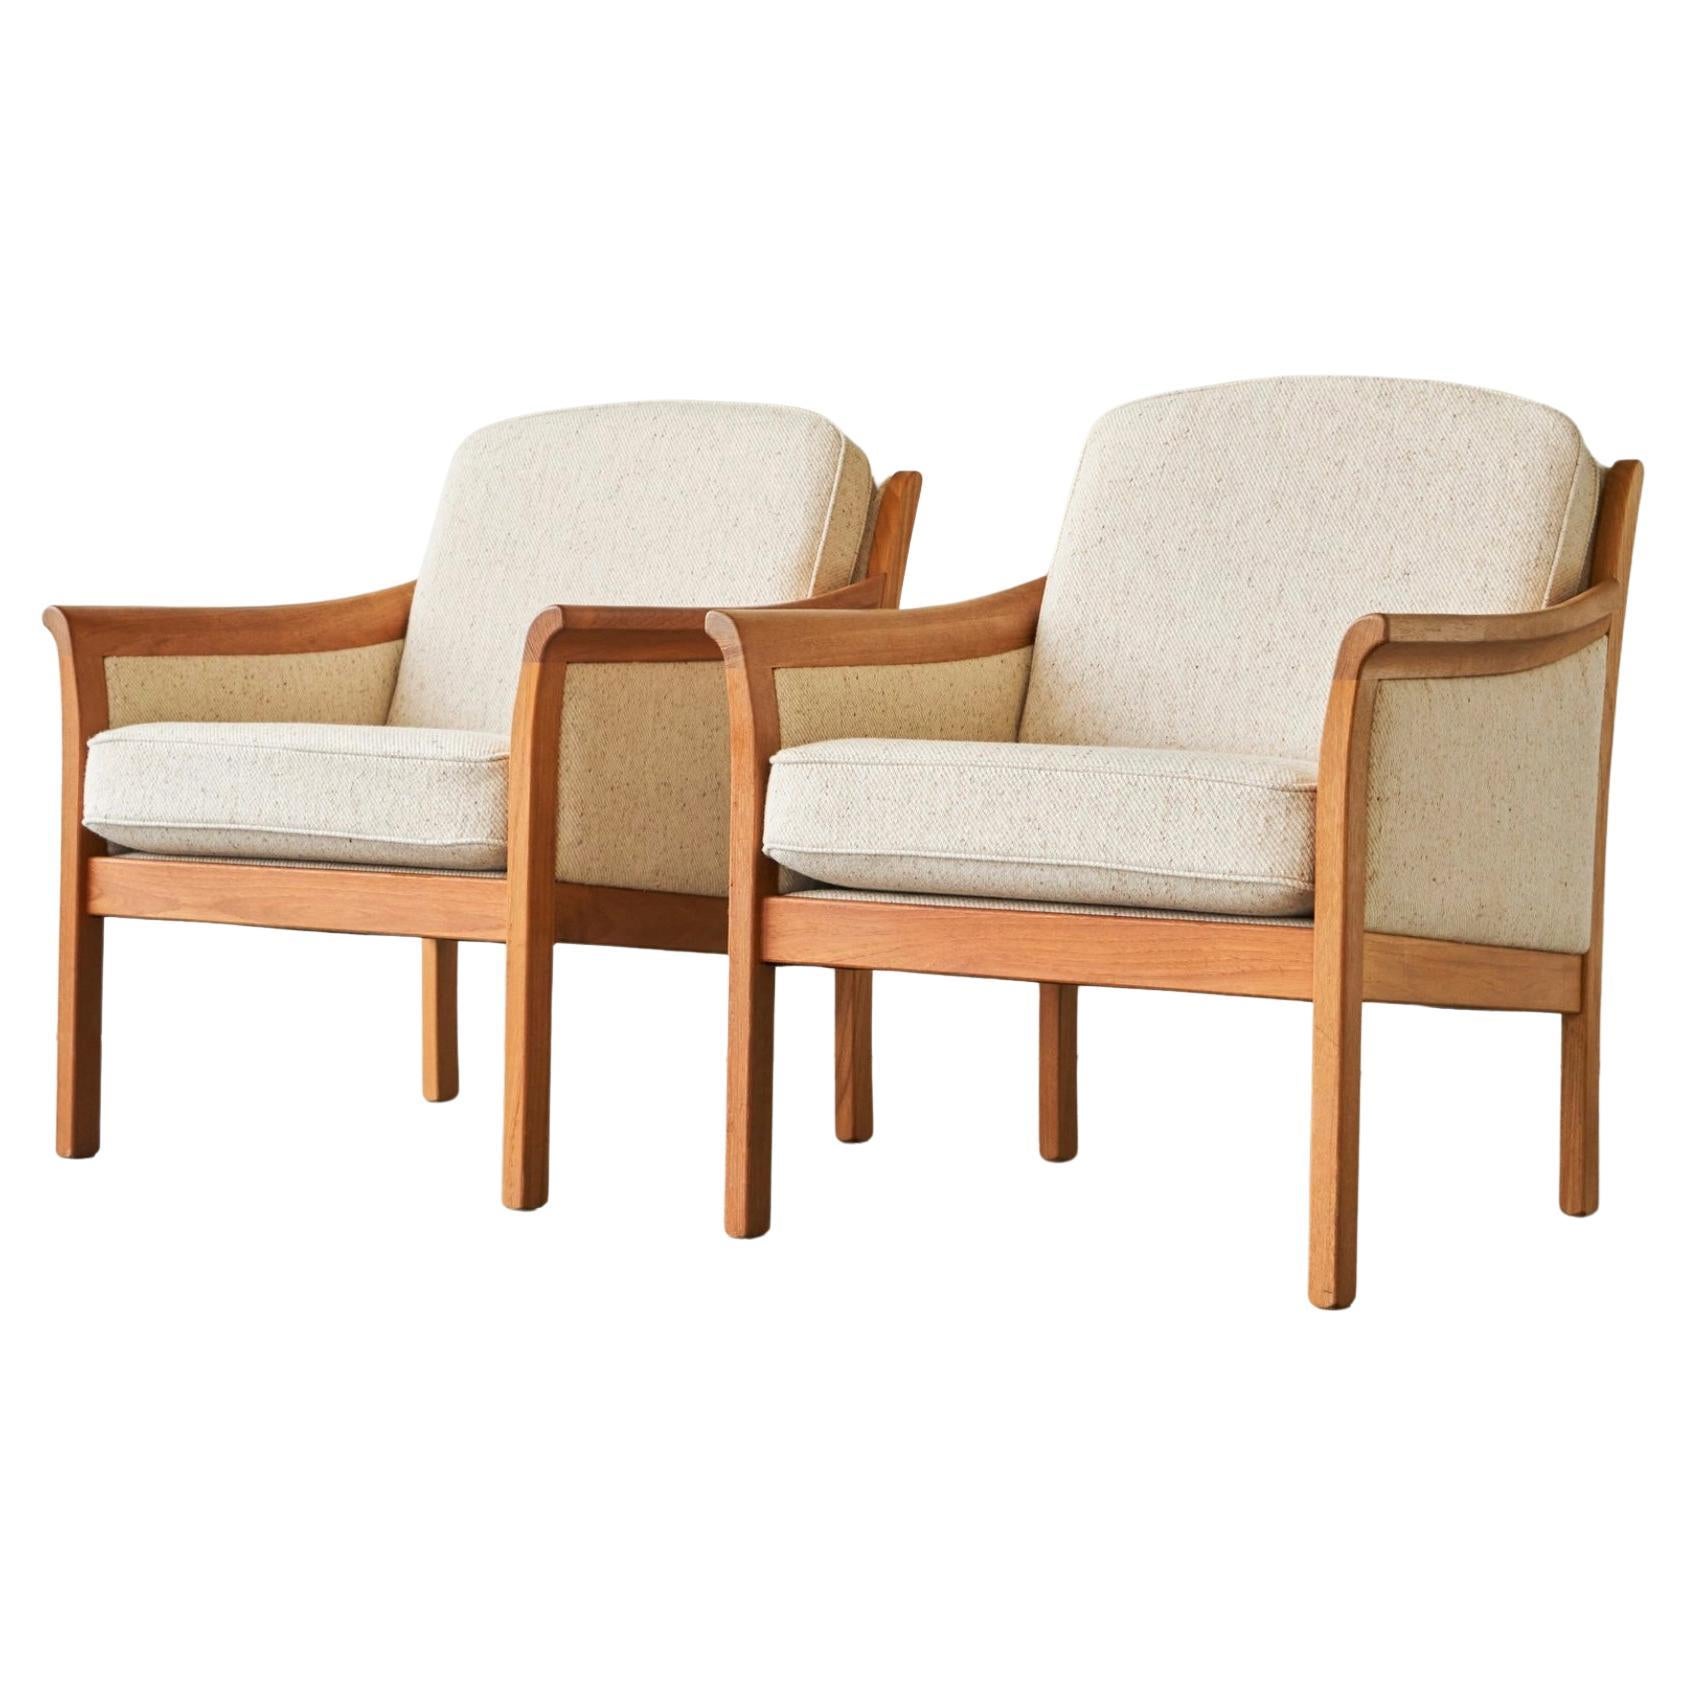 Pair of Scandinavian Lounge Chairs in Wool with Ottoman 1960s For Sale